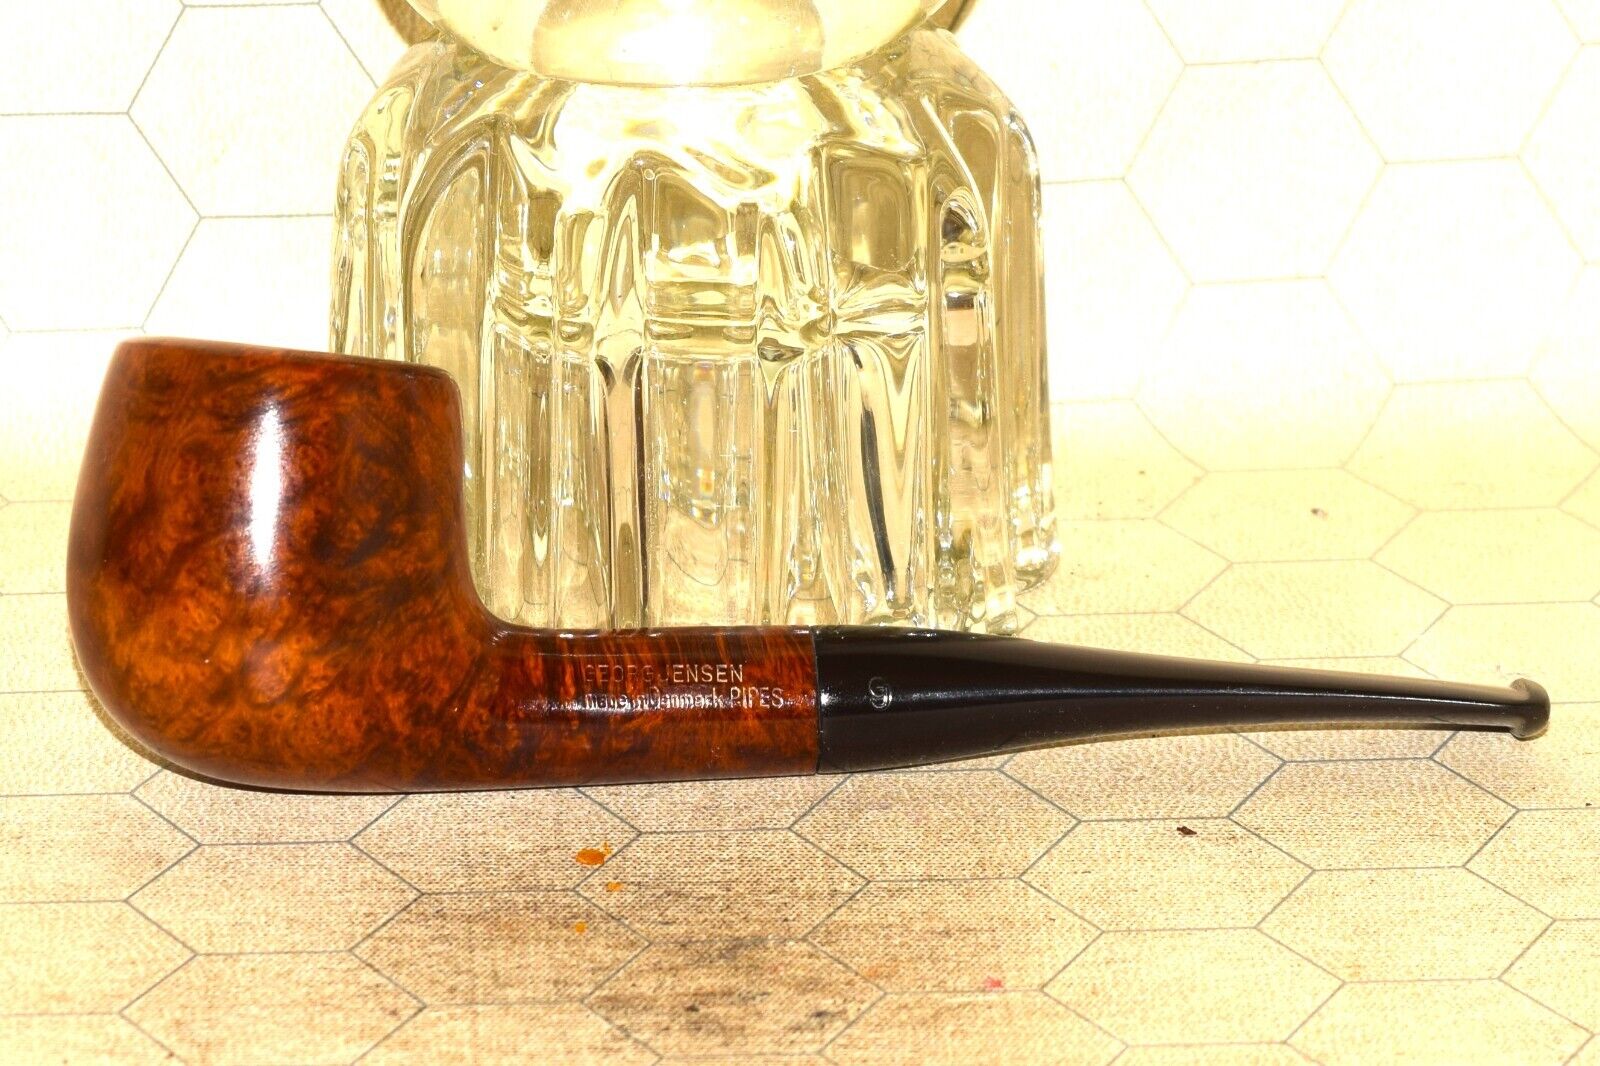 GEORG JENSEN PIPES 1828 FIREFLAME MADE IN DENMARK  Tobacco Pipe #A976